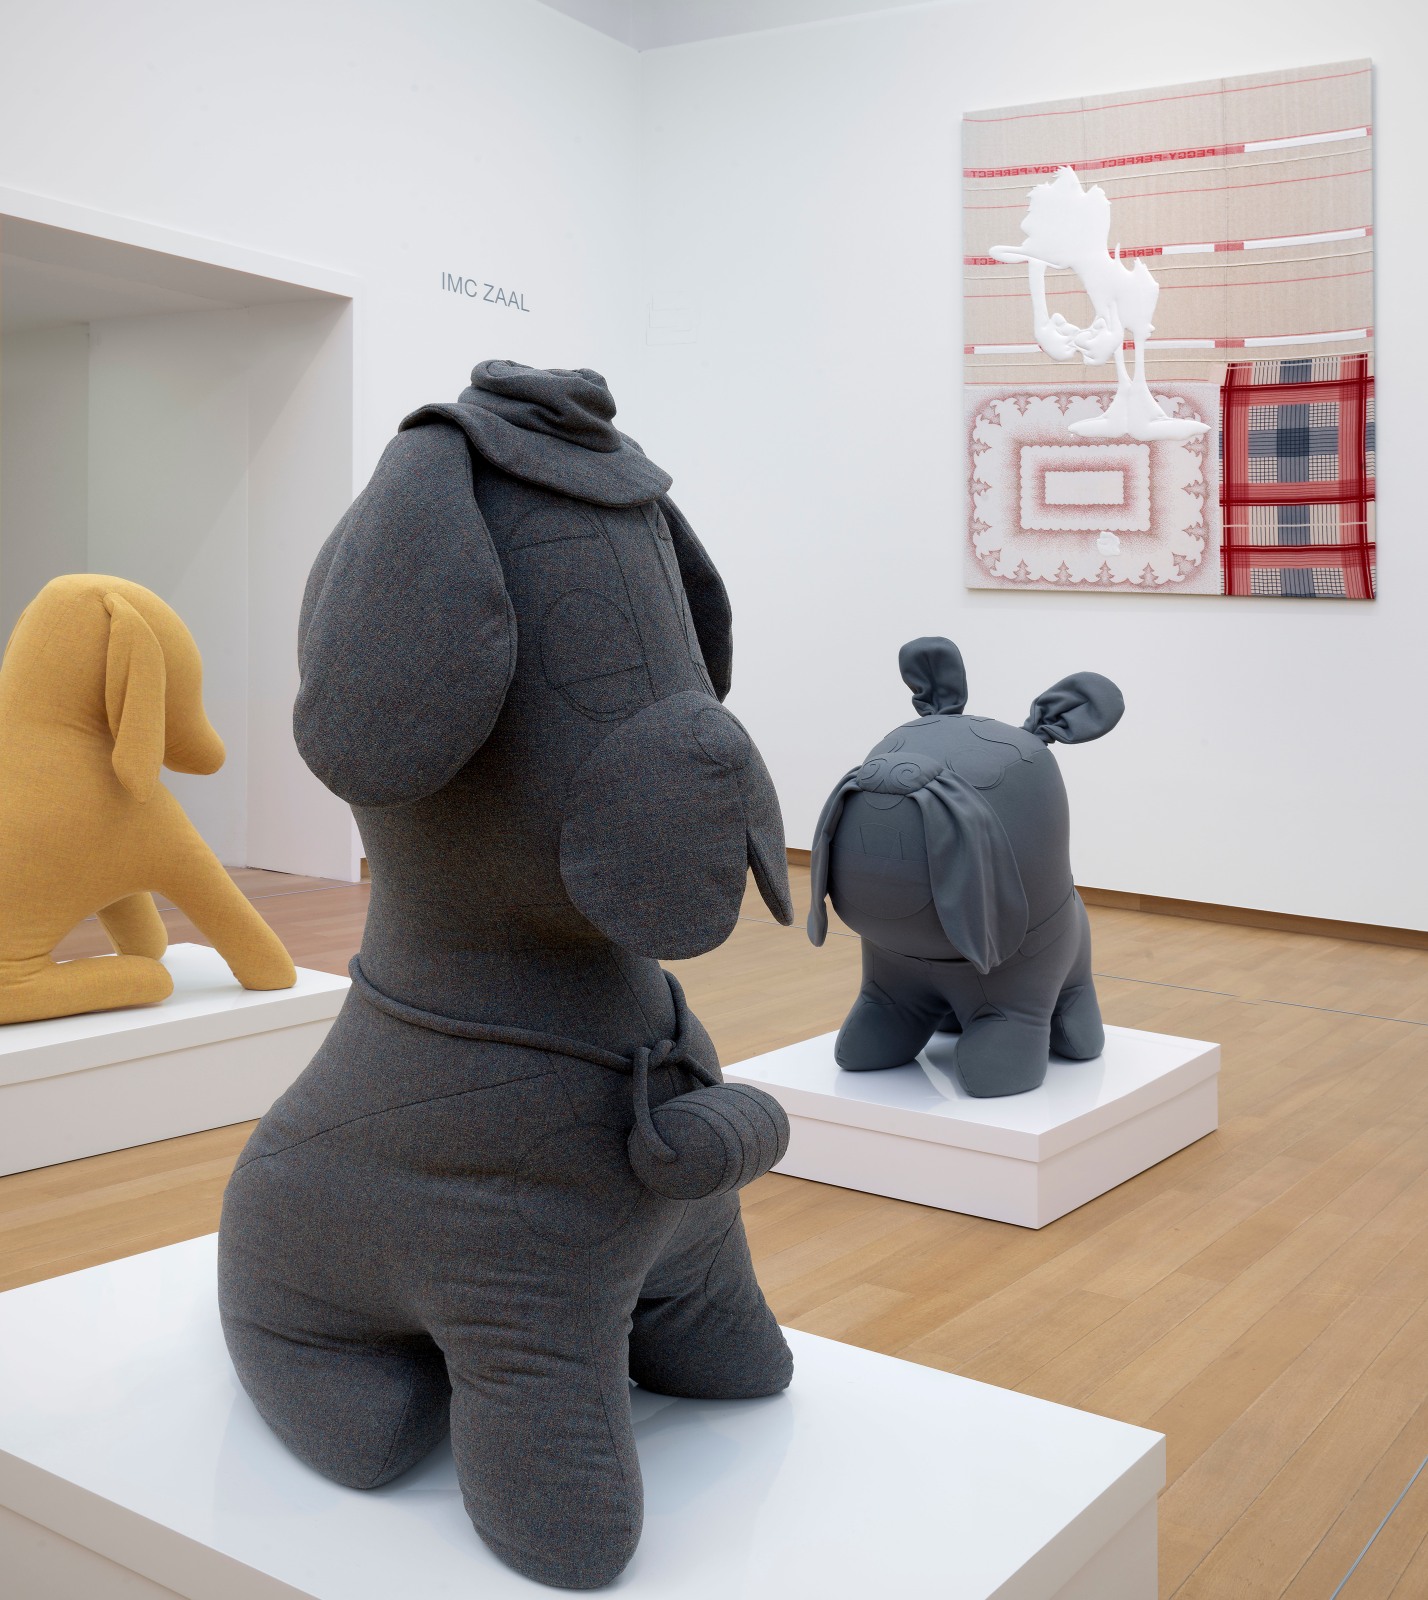 Installation view from the Stedelik Museum of three stuffed dogs. One is a gray Saint Bernard with a brimmed fabric hat on a white platform. Behind it is a stuffed gray bulldog on a platform and off to the side is a yellow stuffed flappy-eared dog. Hanging on the wall in the background is a fabric painting.